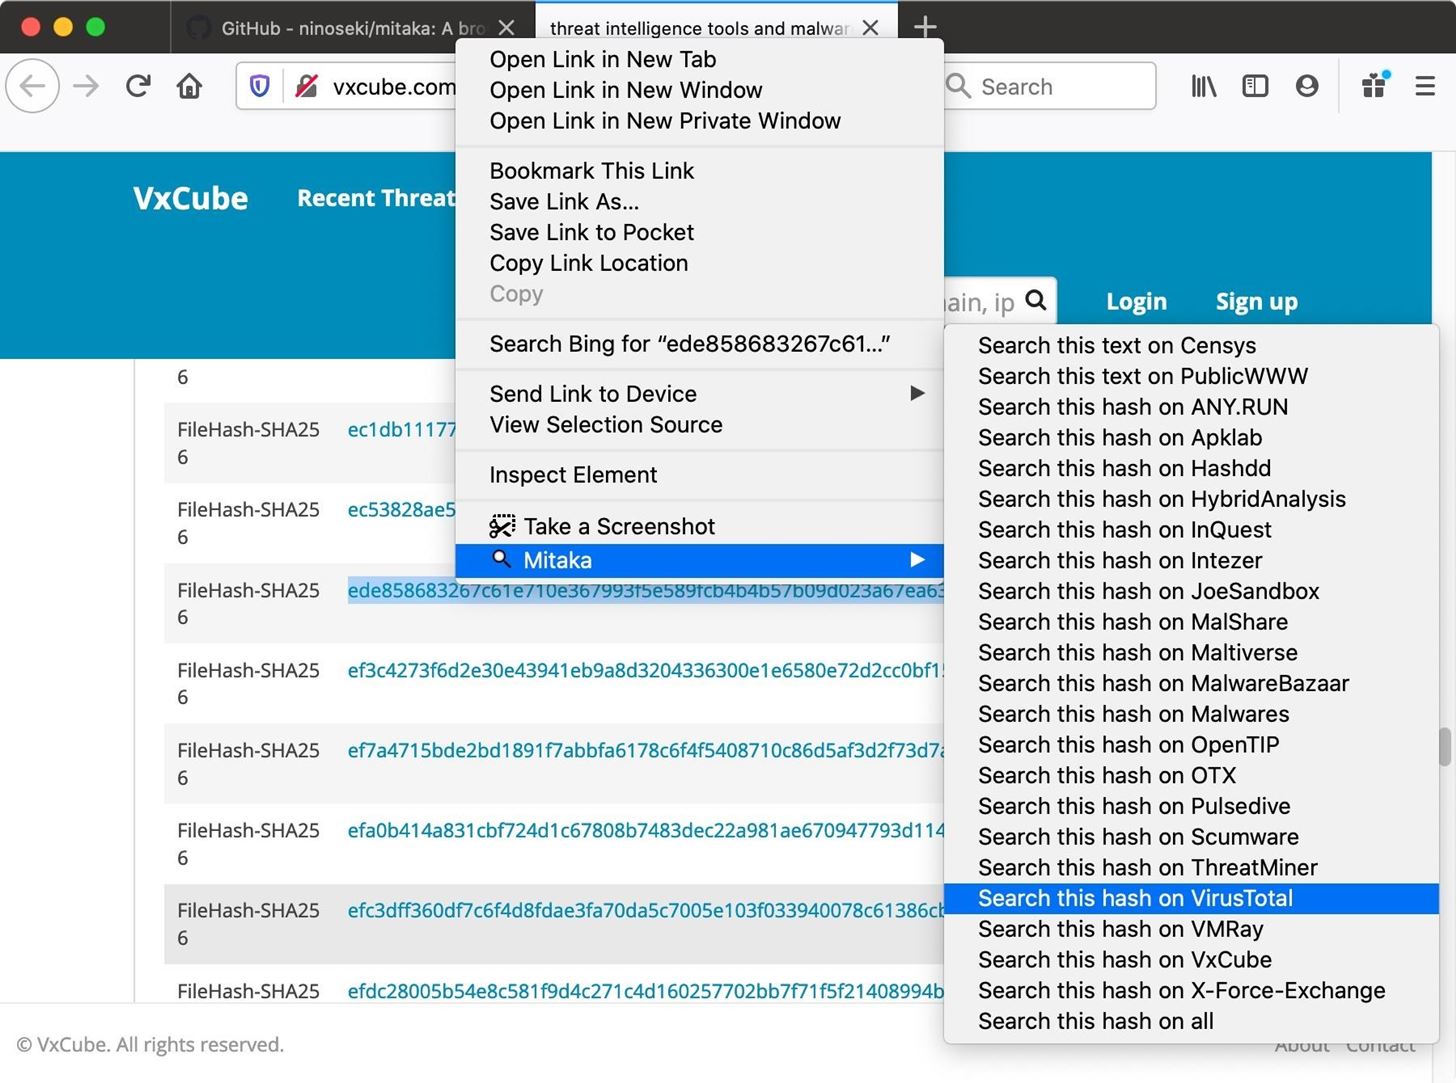 Use Mitaka to Perform In-Browser OSINT to Identify Malware, Sketchy Sites, Shady Emails & More